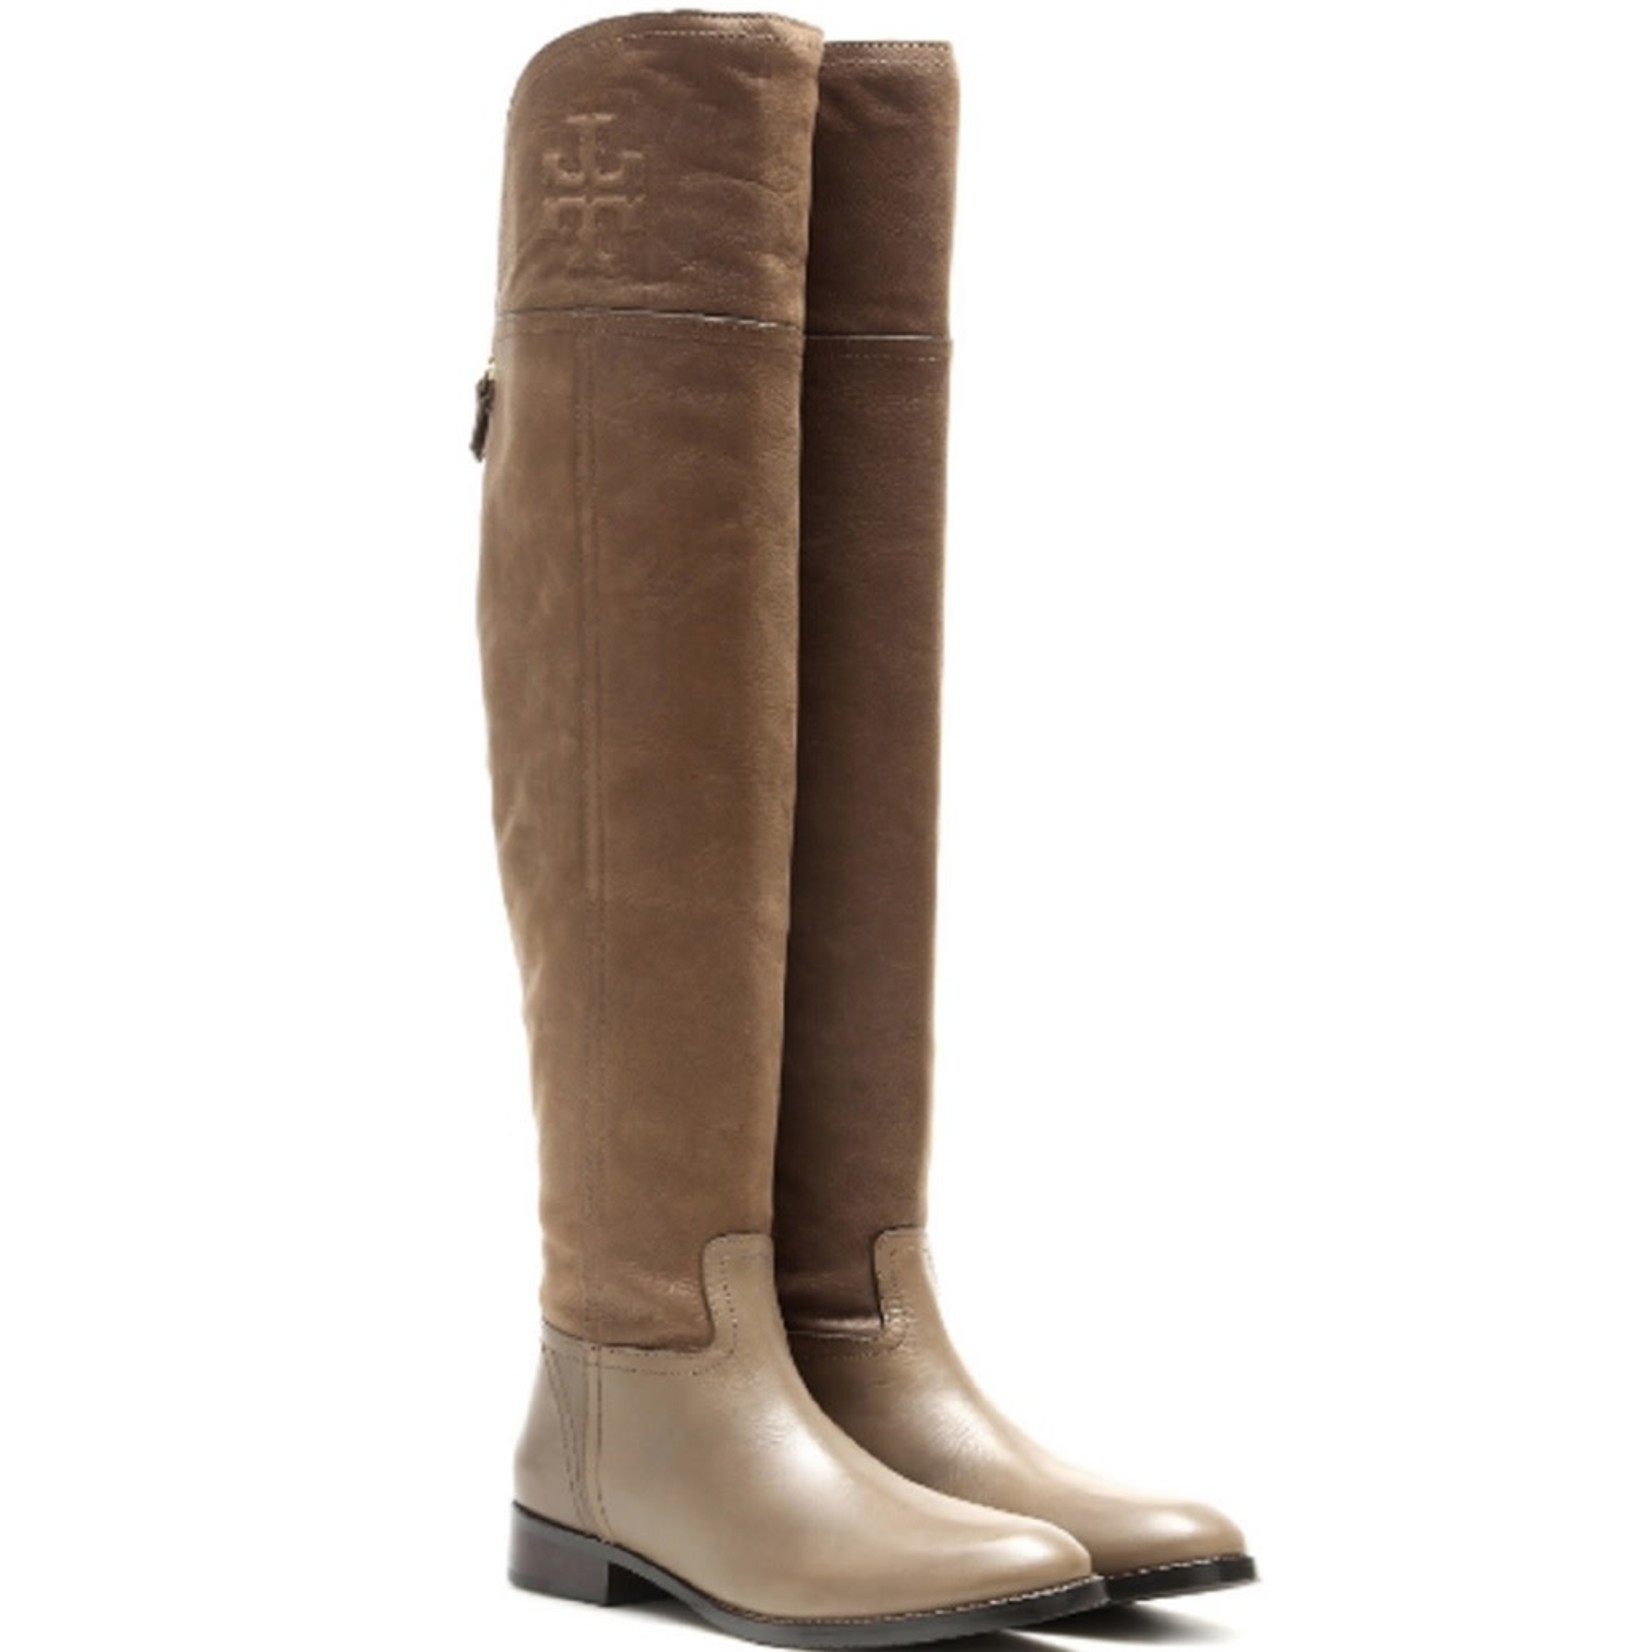 Tory Burch Over The Knee Equestrian Boots, 5.5